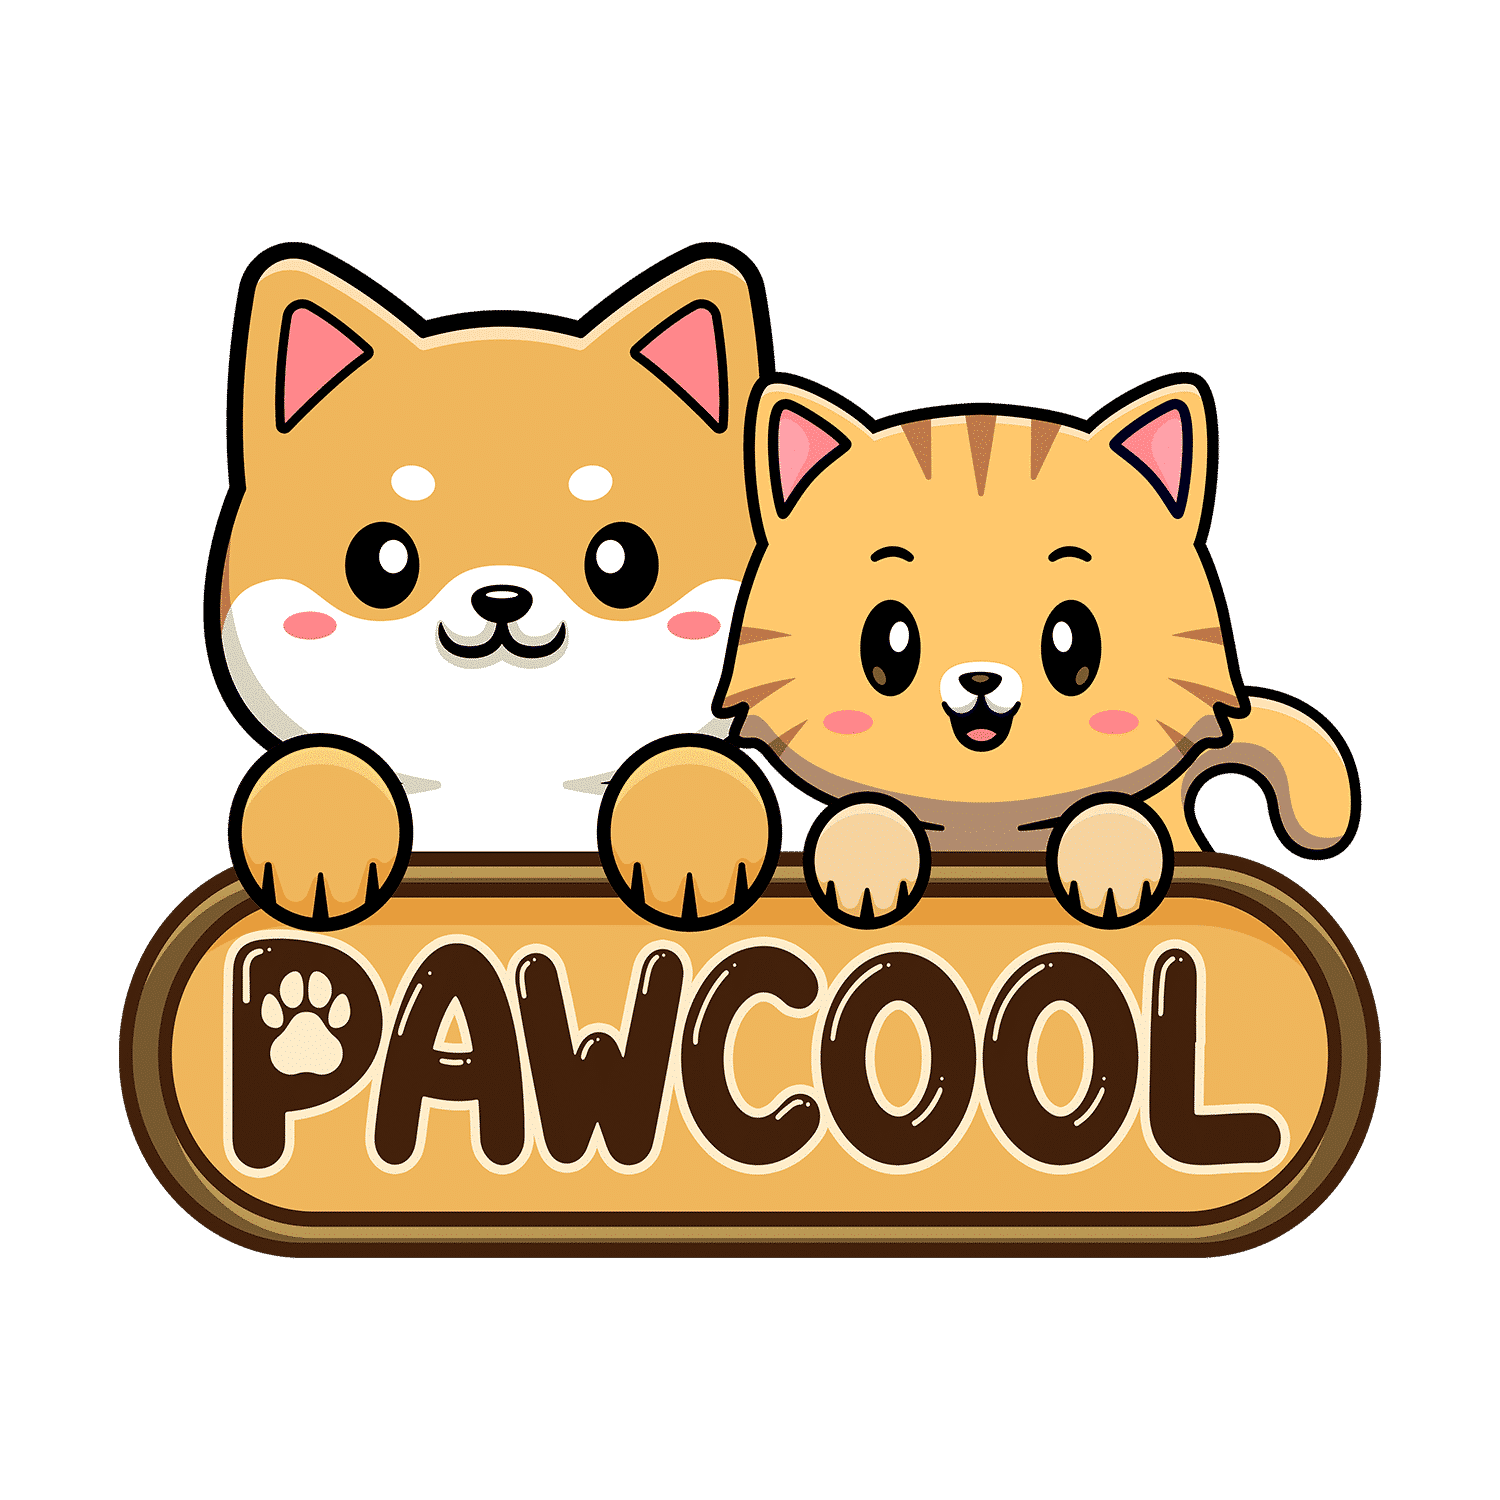 pawcool-deliver-happiness-with-personalized-custom-pet-art